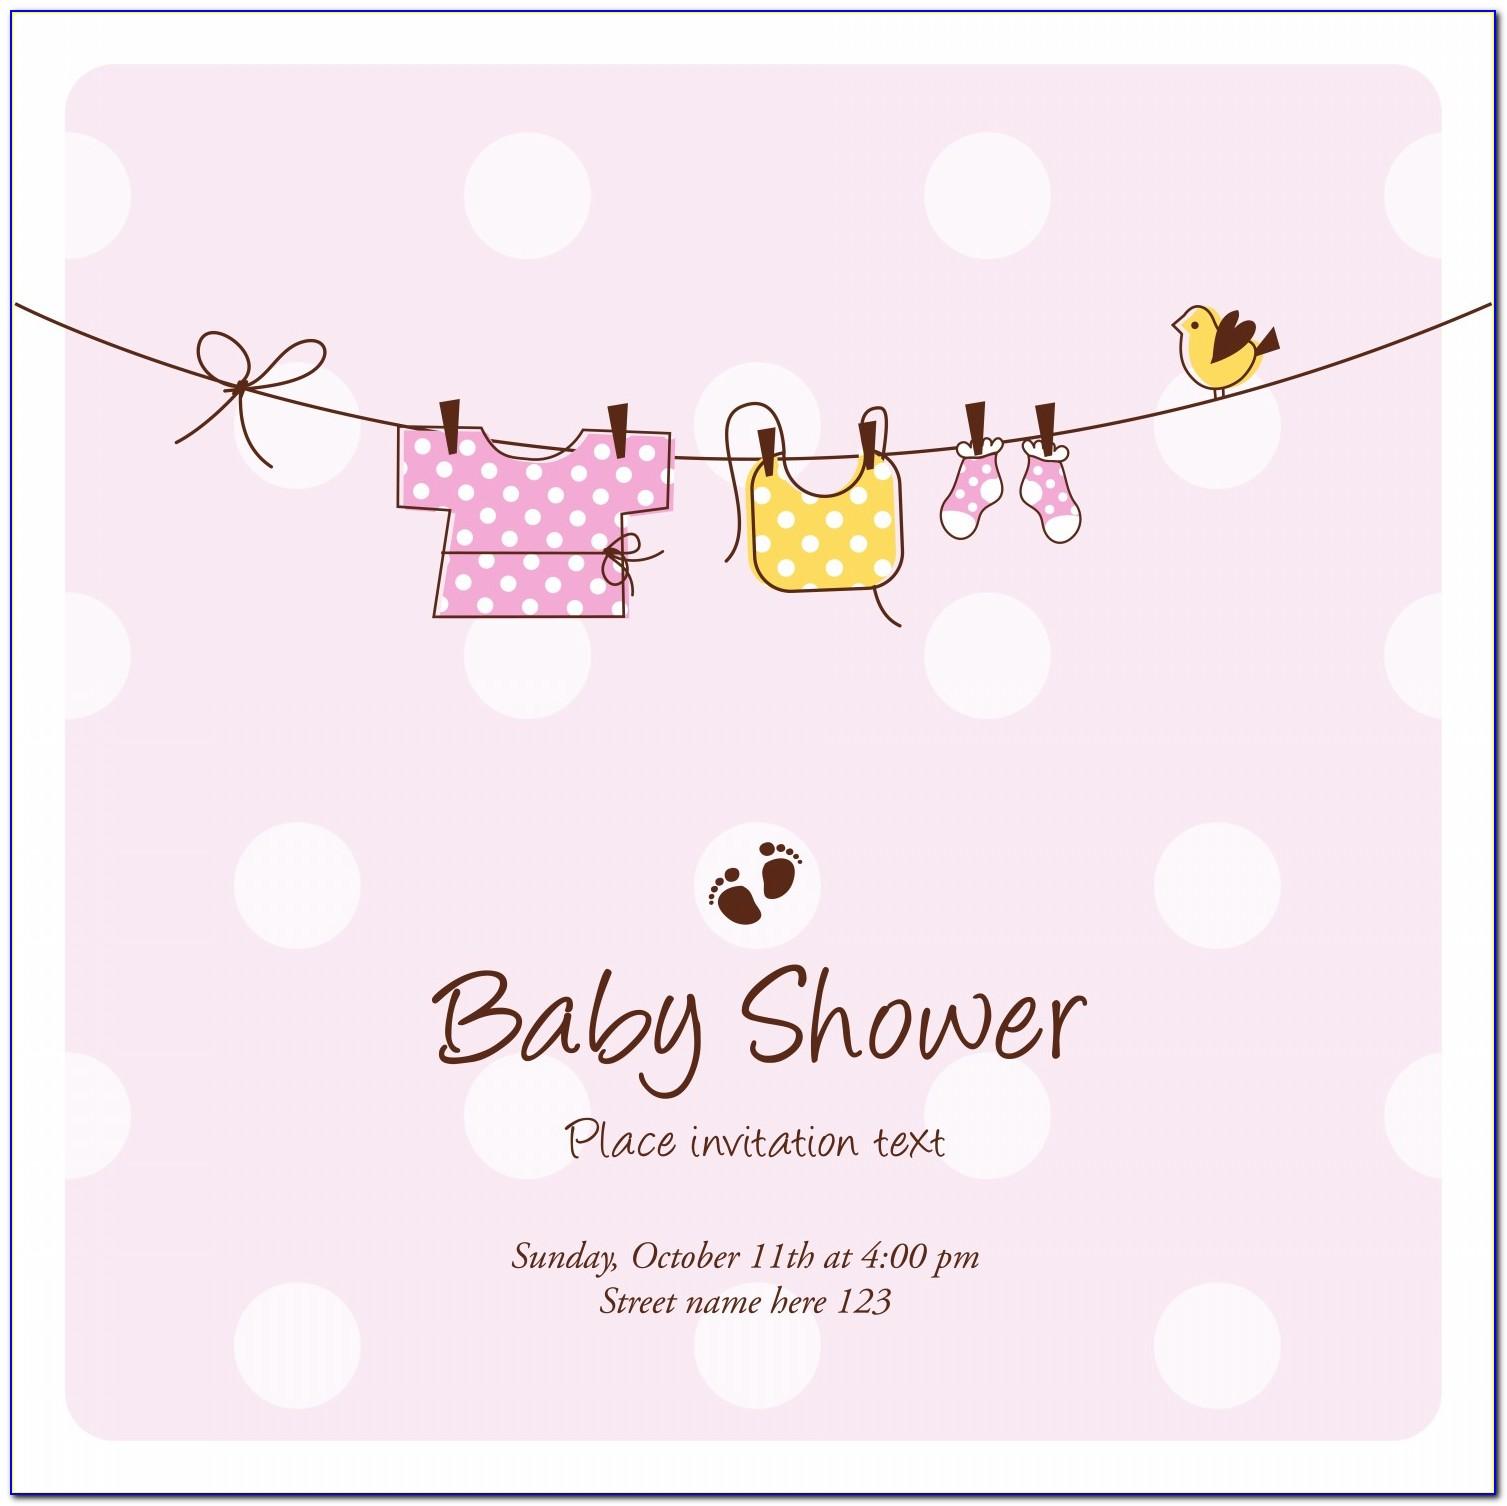 Invitation Card Template For Baby Shower